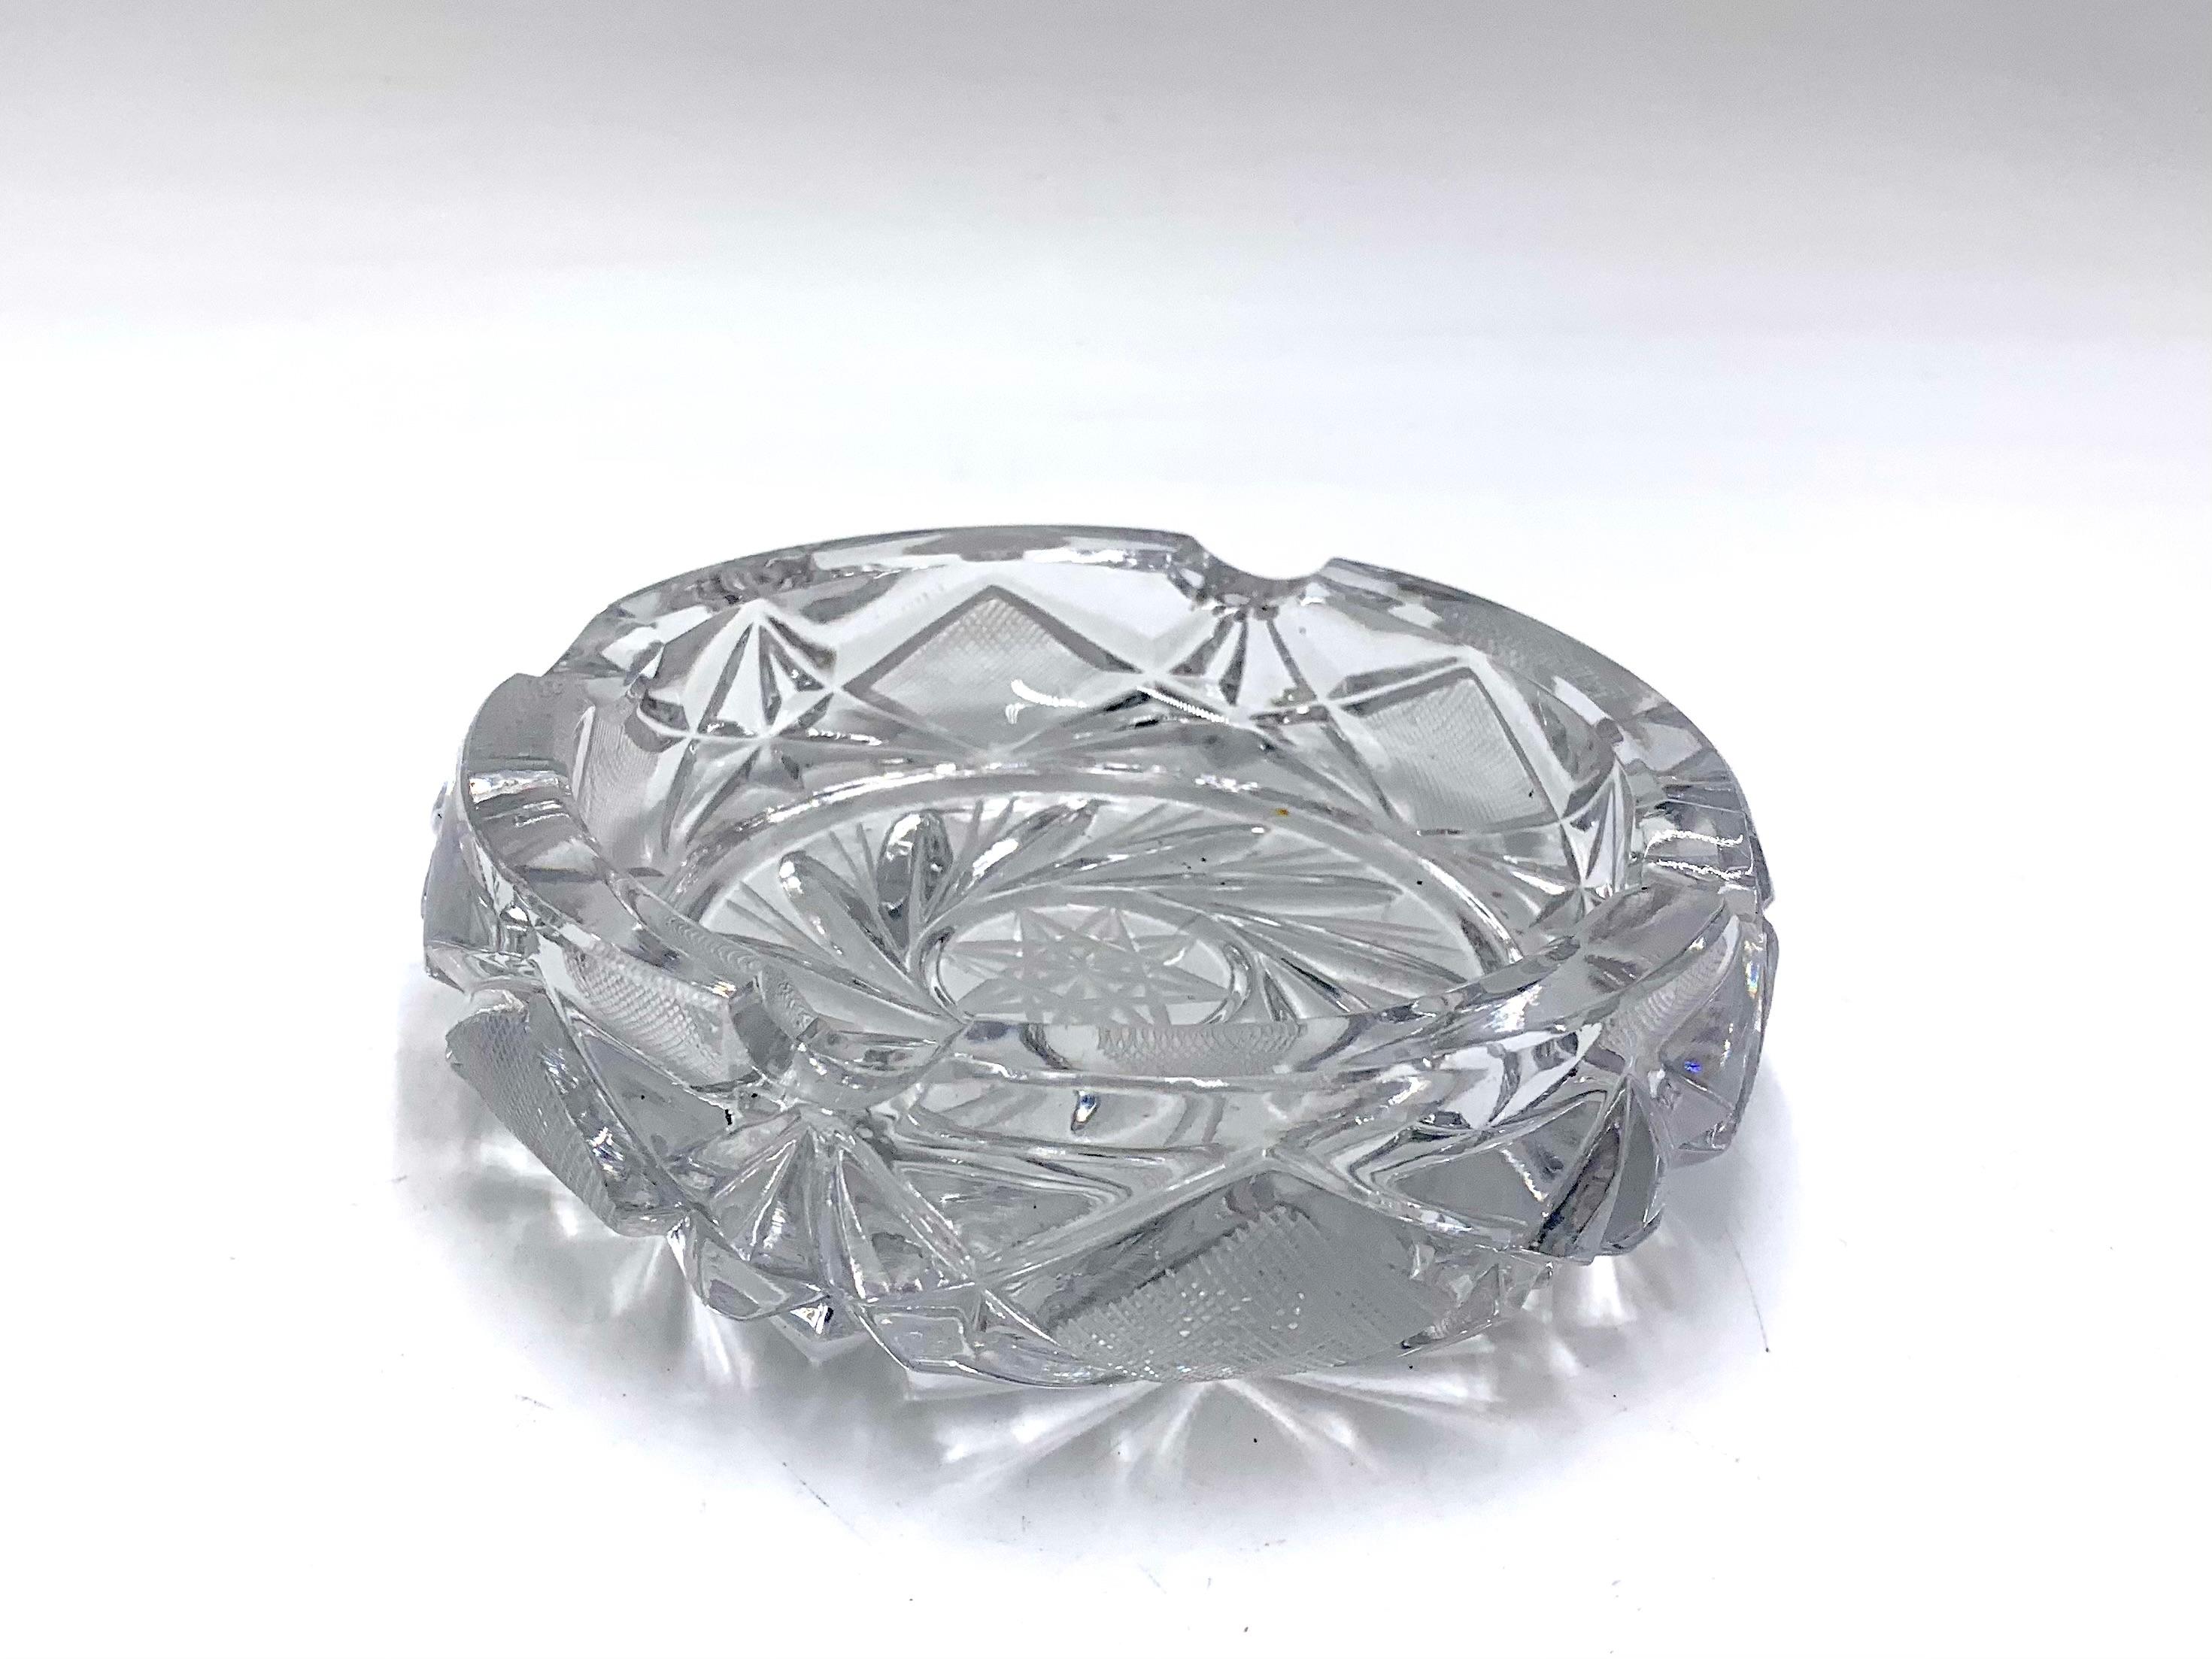 Crystal ashtray from mid XX century
Very good condition
Produced in Poland in around 1960s. 
 